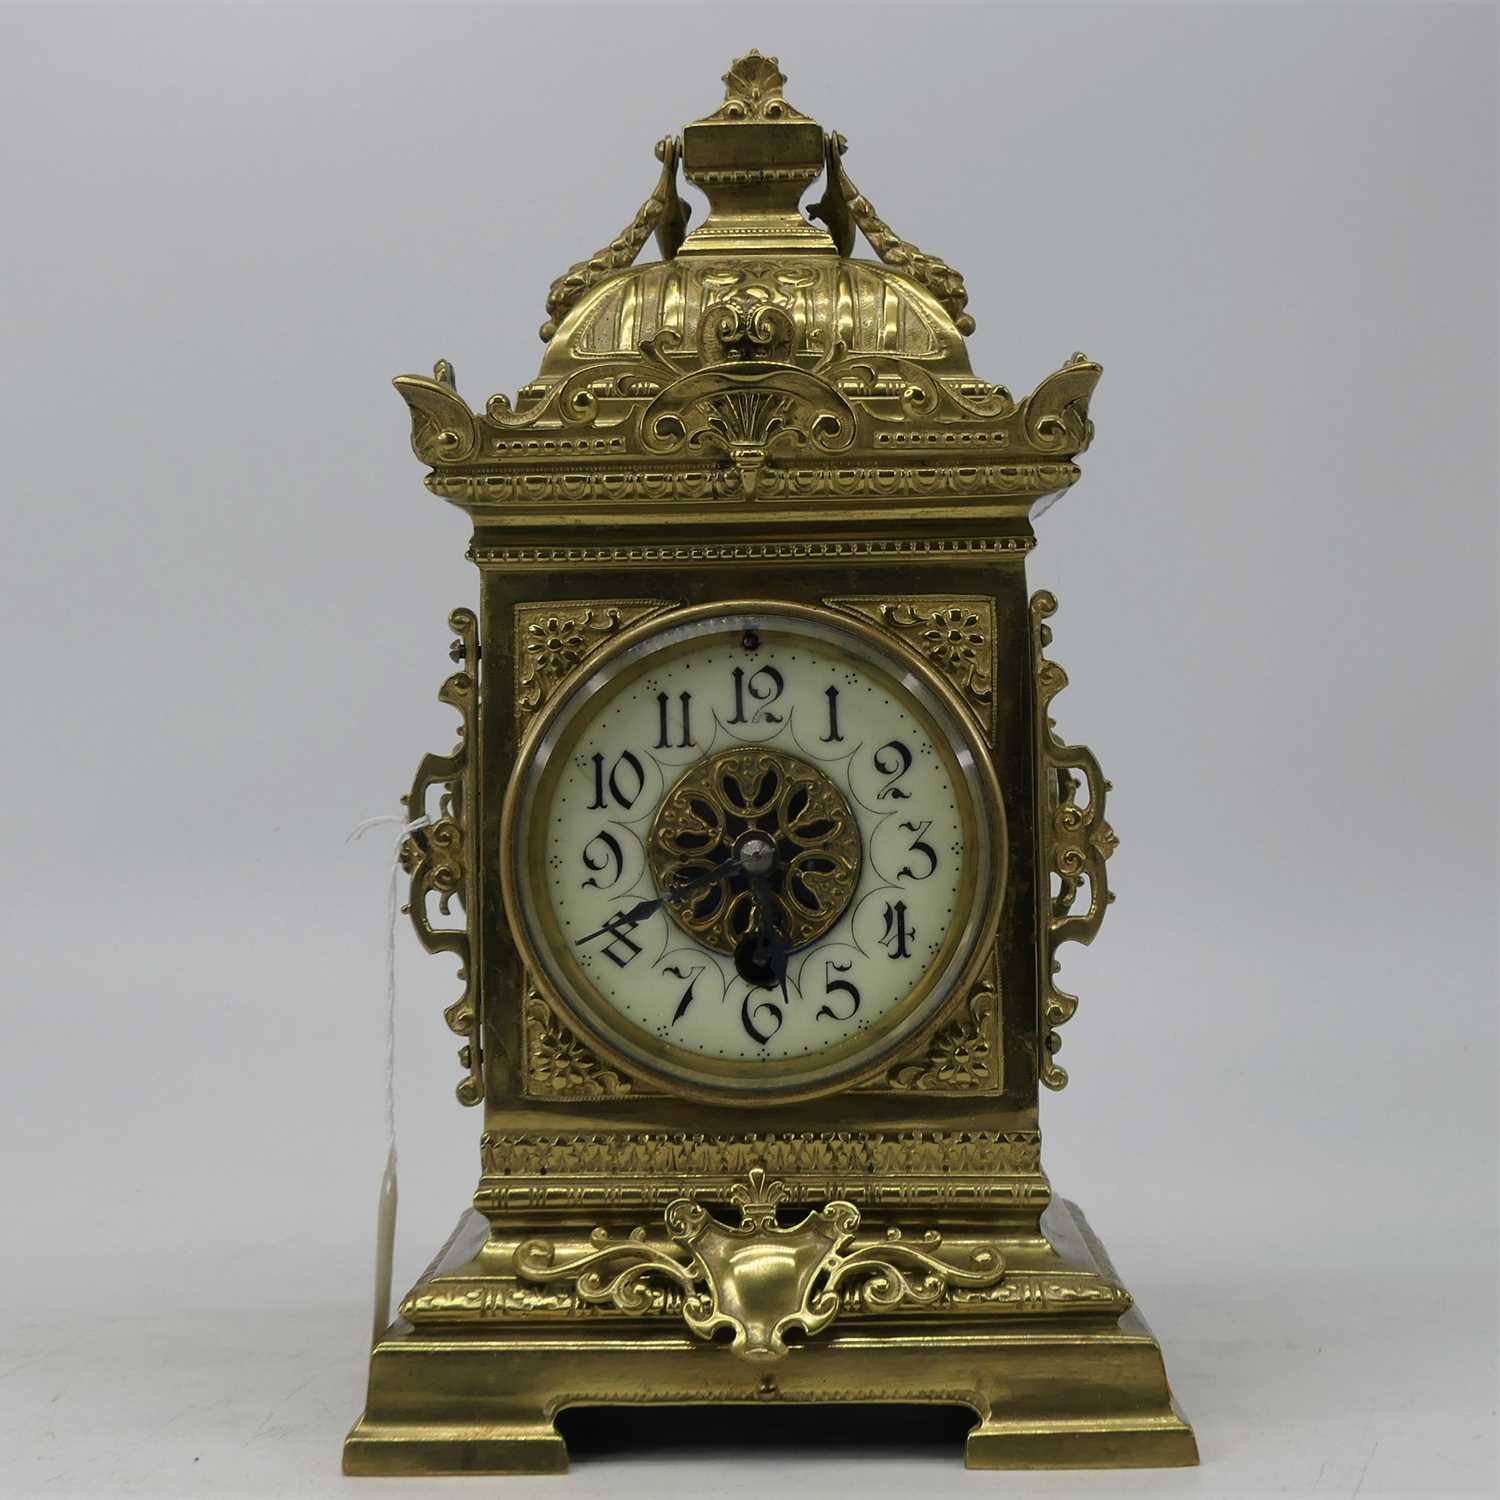 A late 19th century brass cased mantel clock, having a caddy-type top above an enamelled chapter